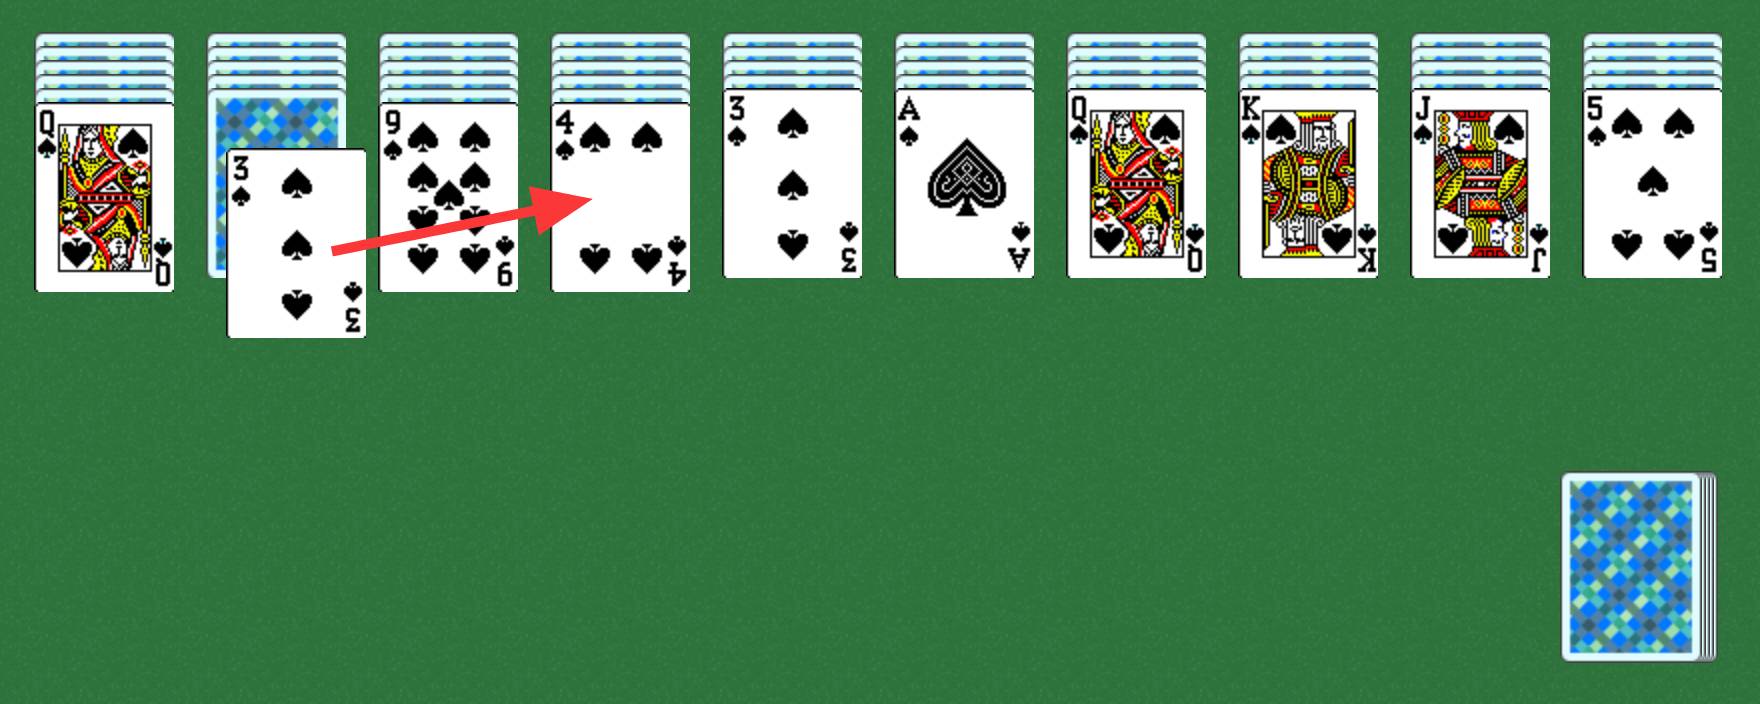 Rules of Spider Solitaire